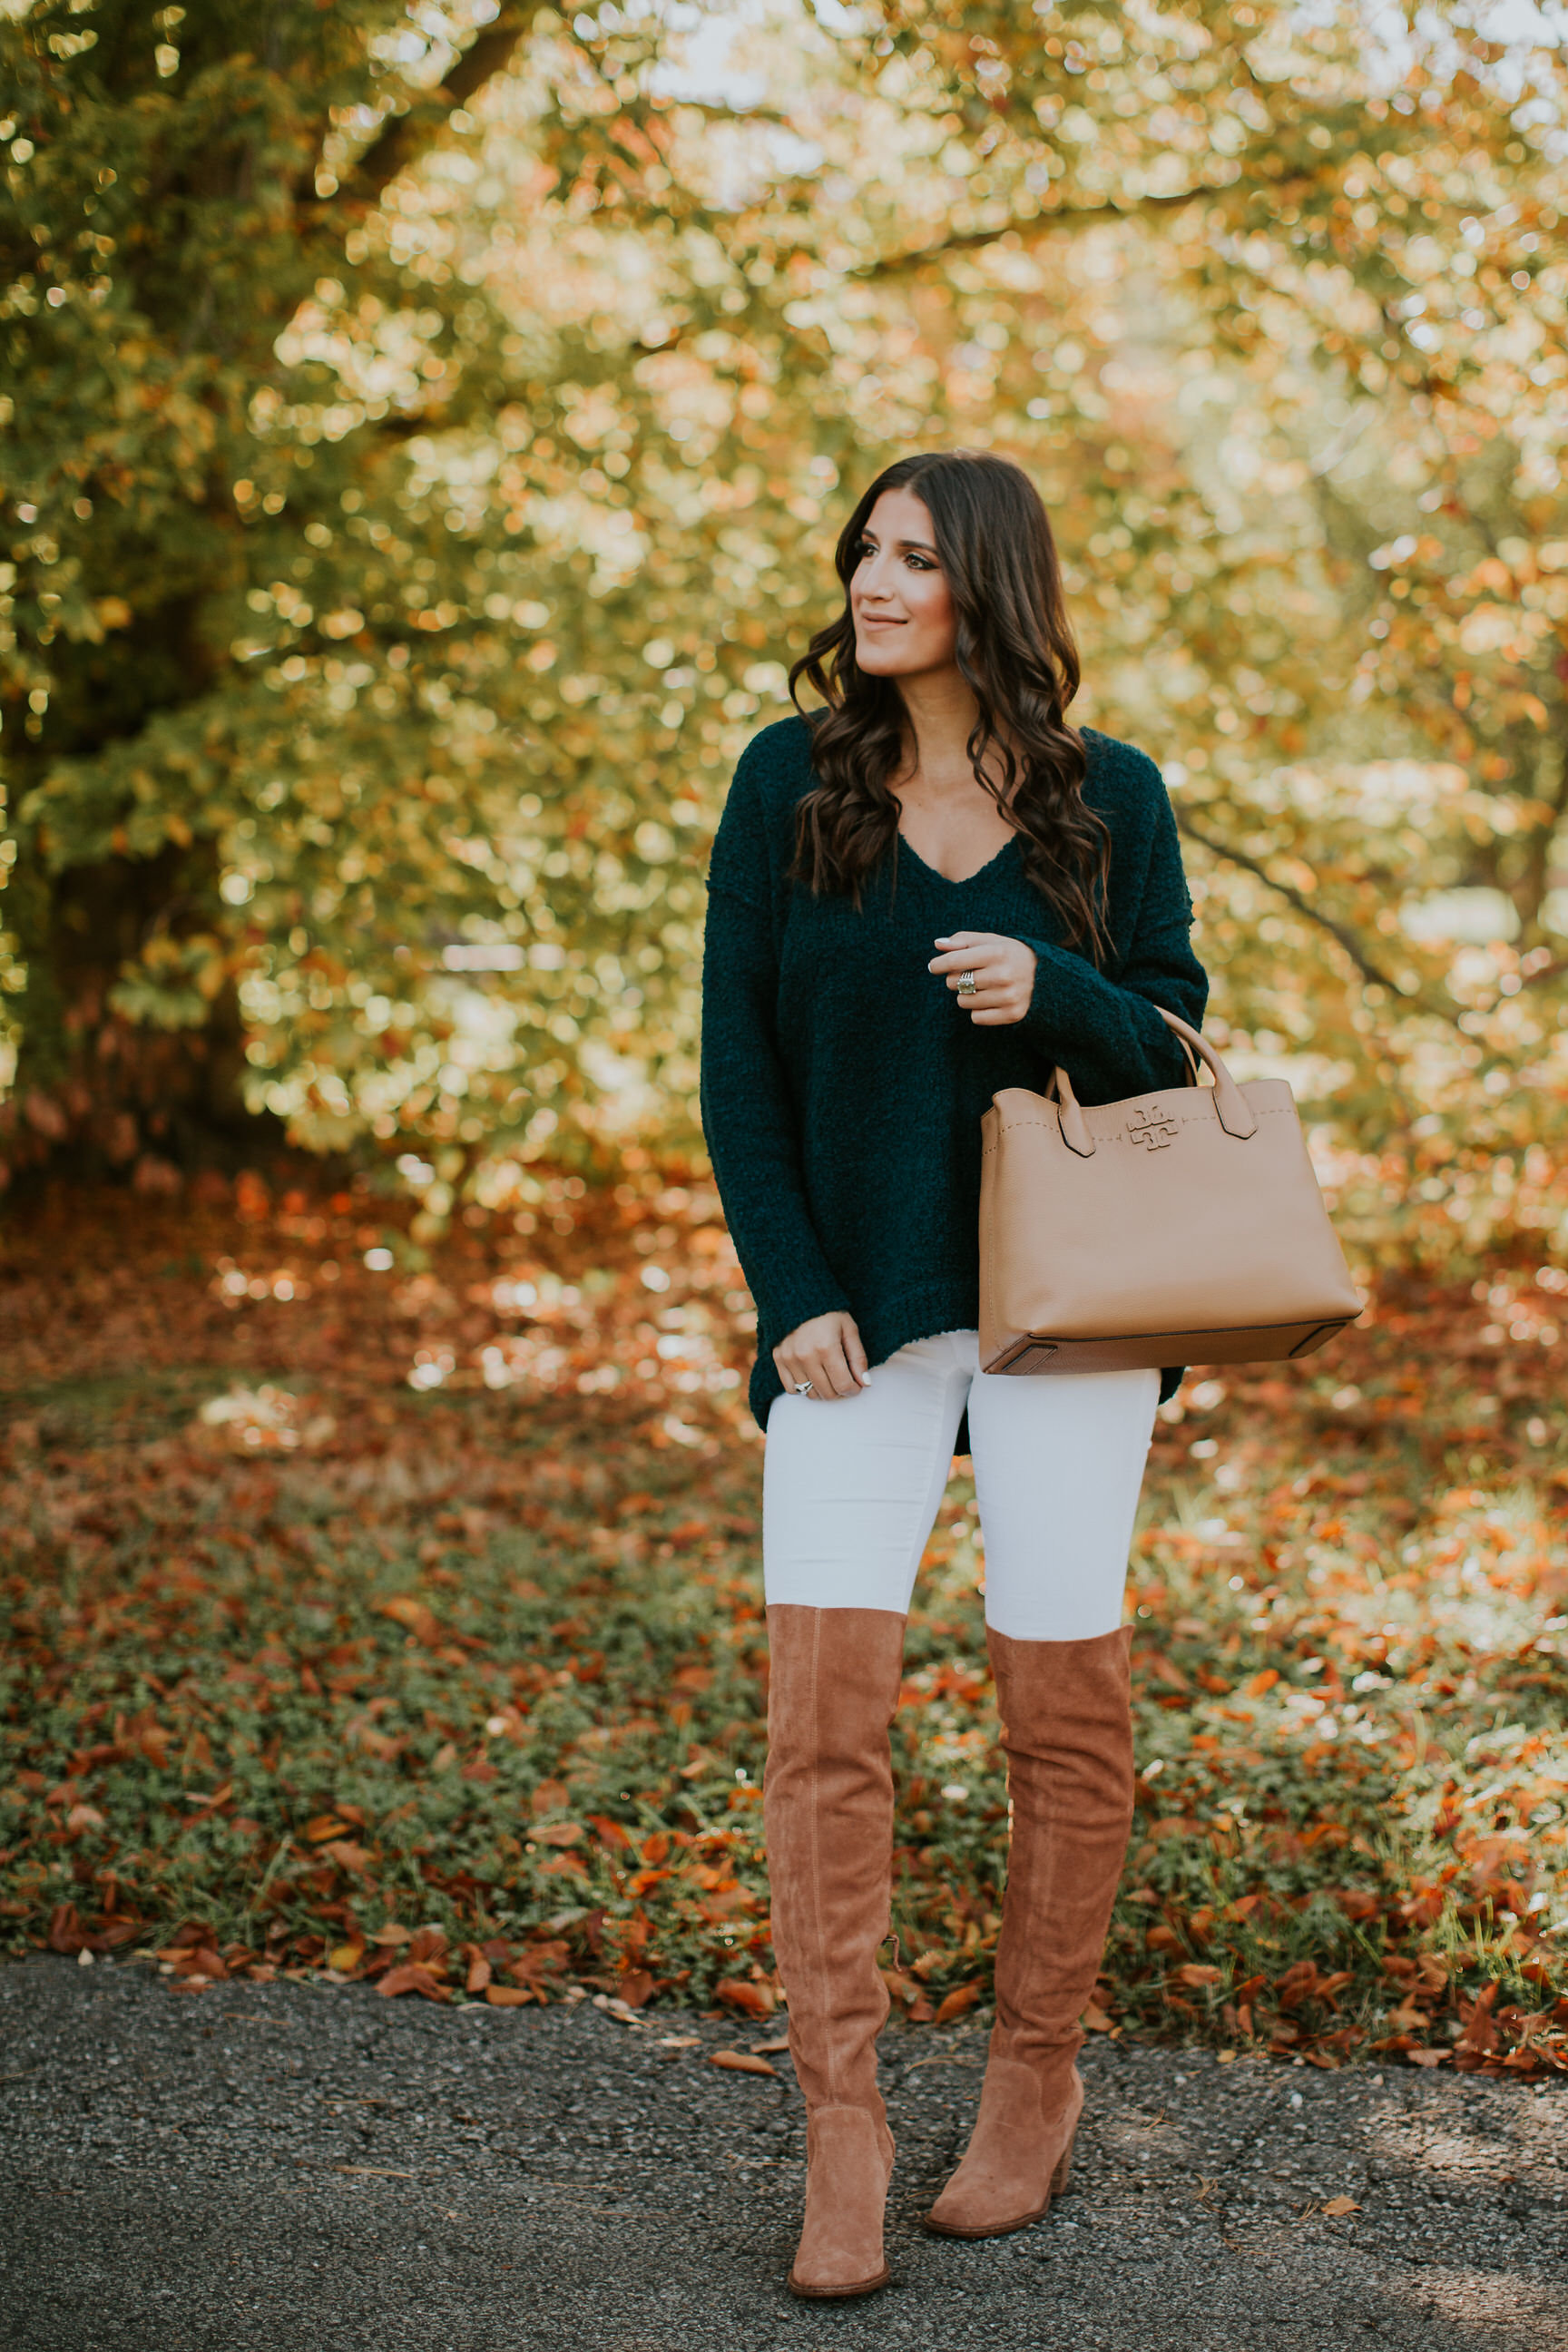 oversized pullover, free people lofty v-neck sweater, free people sweaters, free people pullovers, over the knee boots, kelsi dagger logan over the knee boots, fall style, fall fashion, tory burch mcgraw tote, tory burch totes, fall outfits, cute fall outfit ideas // grace wainwright a southern drawl